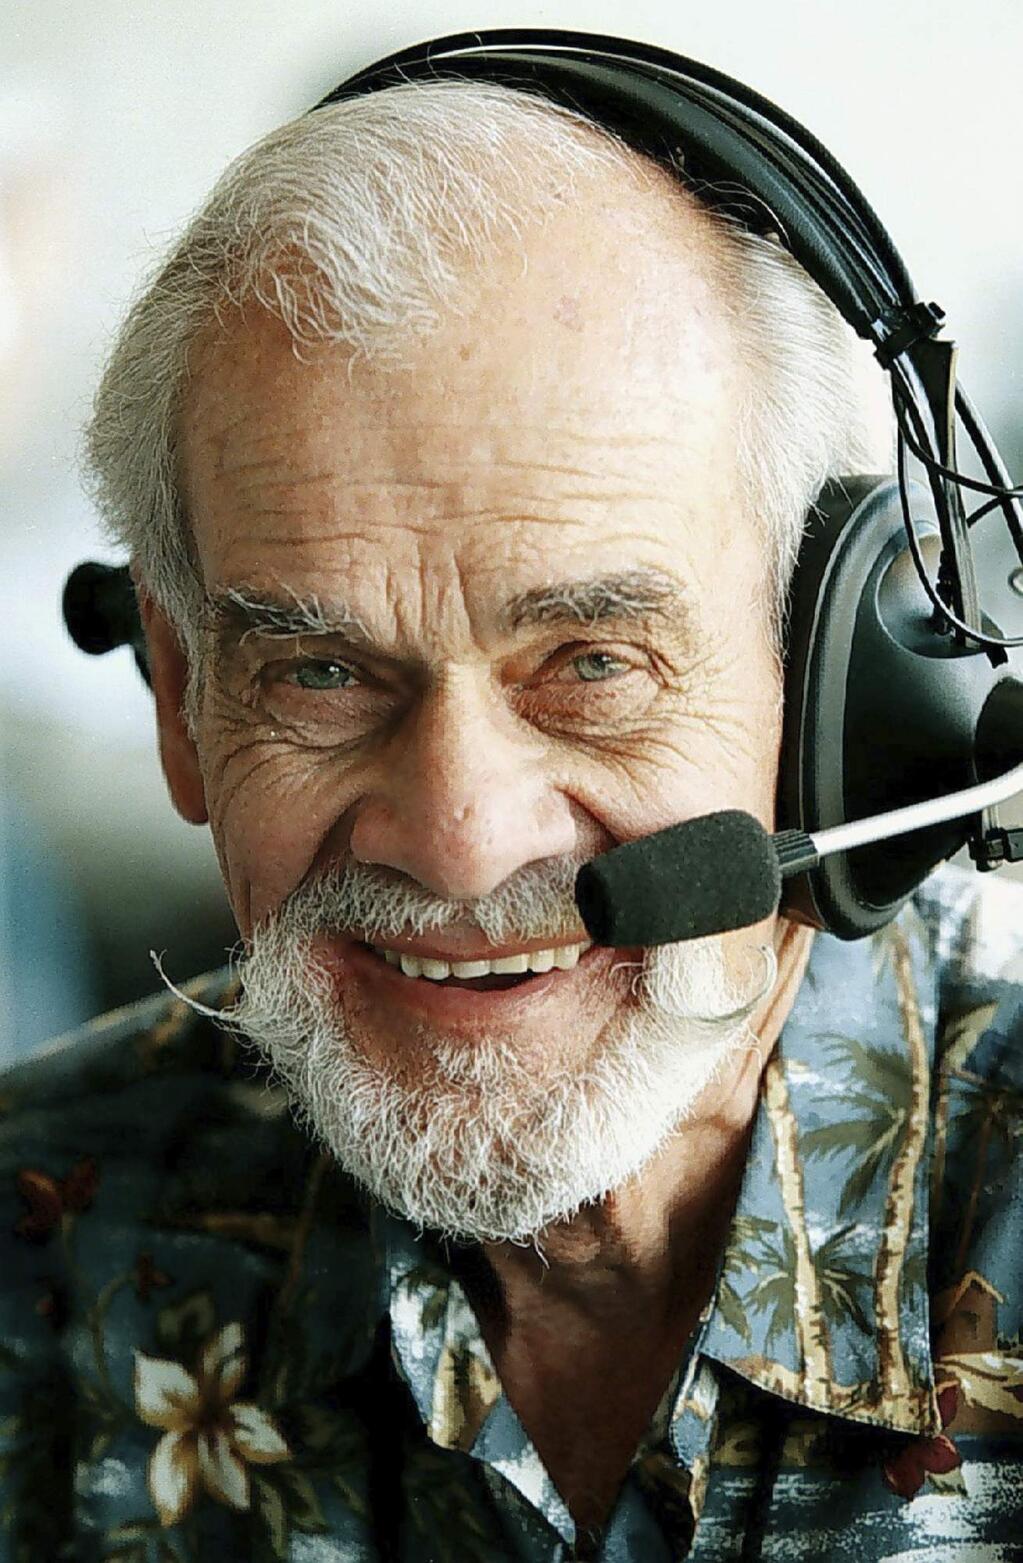 In this April 15, 1999, file photo, longtime Oakland Athletics radio voice Bill King is shown. King has won the Ford C. Frick Award presented by the Hall of Fame for excellence in broadcasting. The award was announced Wednesday, Dec. 7, 2016, at the winter meetings. King died in 2005 after 25 years of calling A's games. (Nick Lammers/Oakland Tribune via AP)